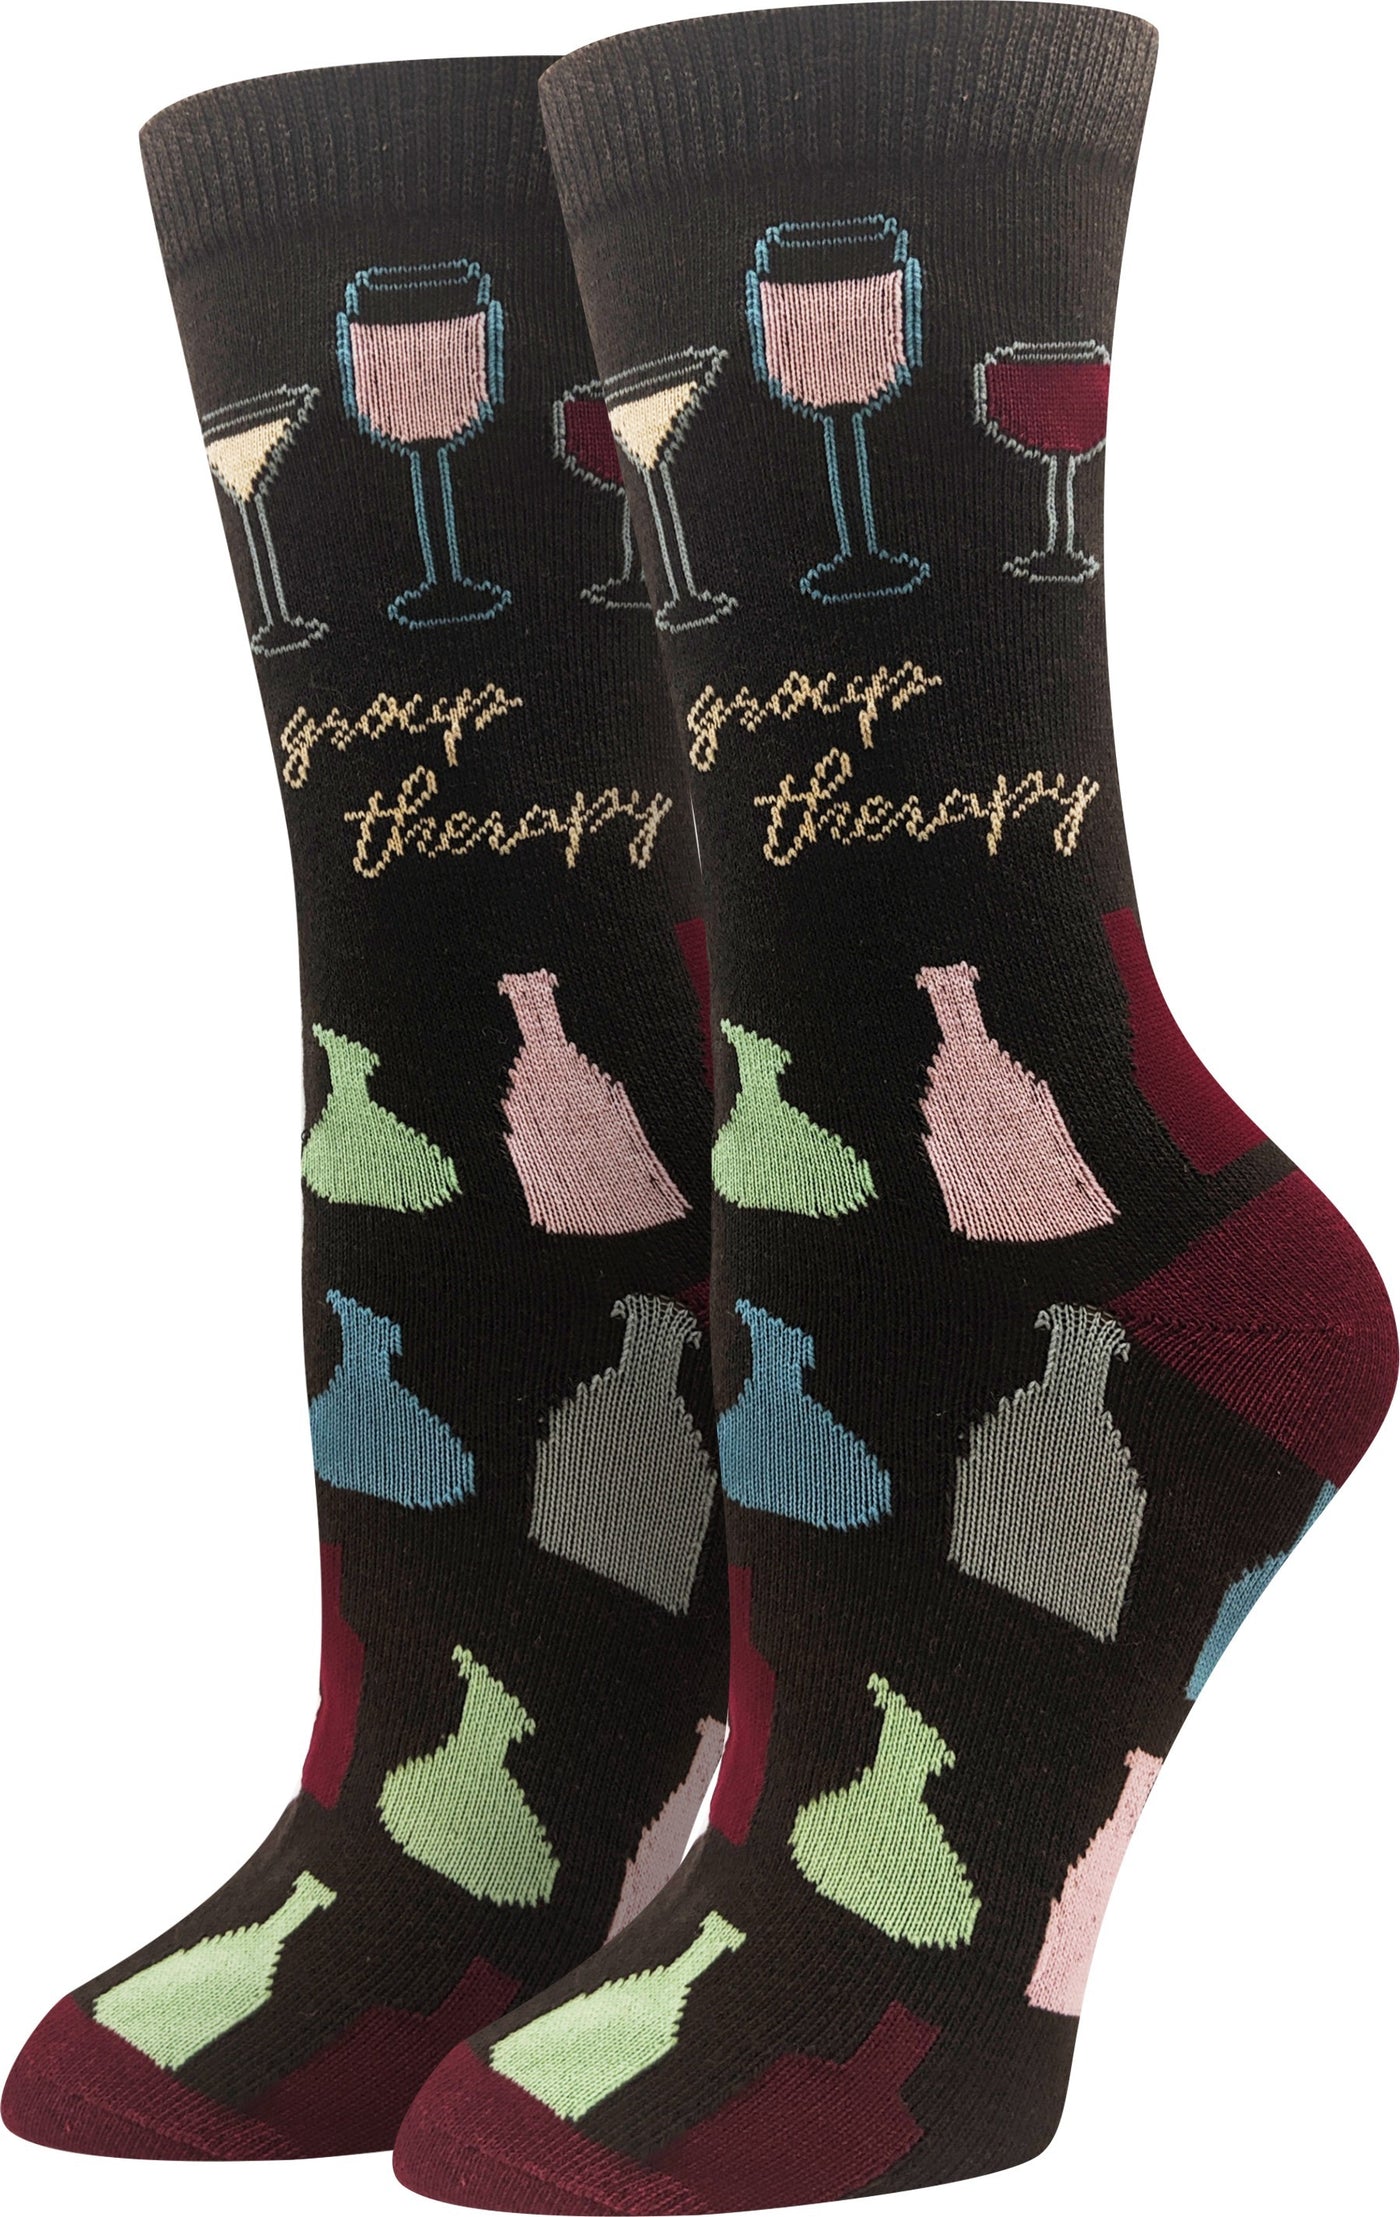 Group Therapy Socks